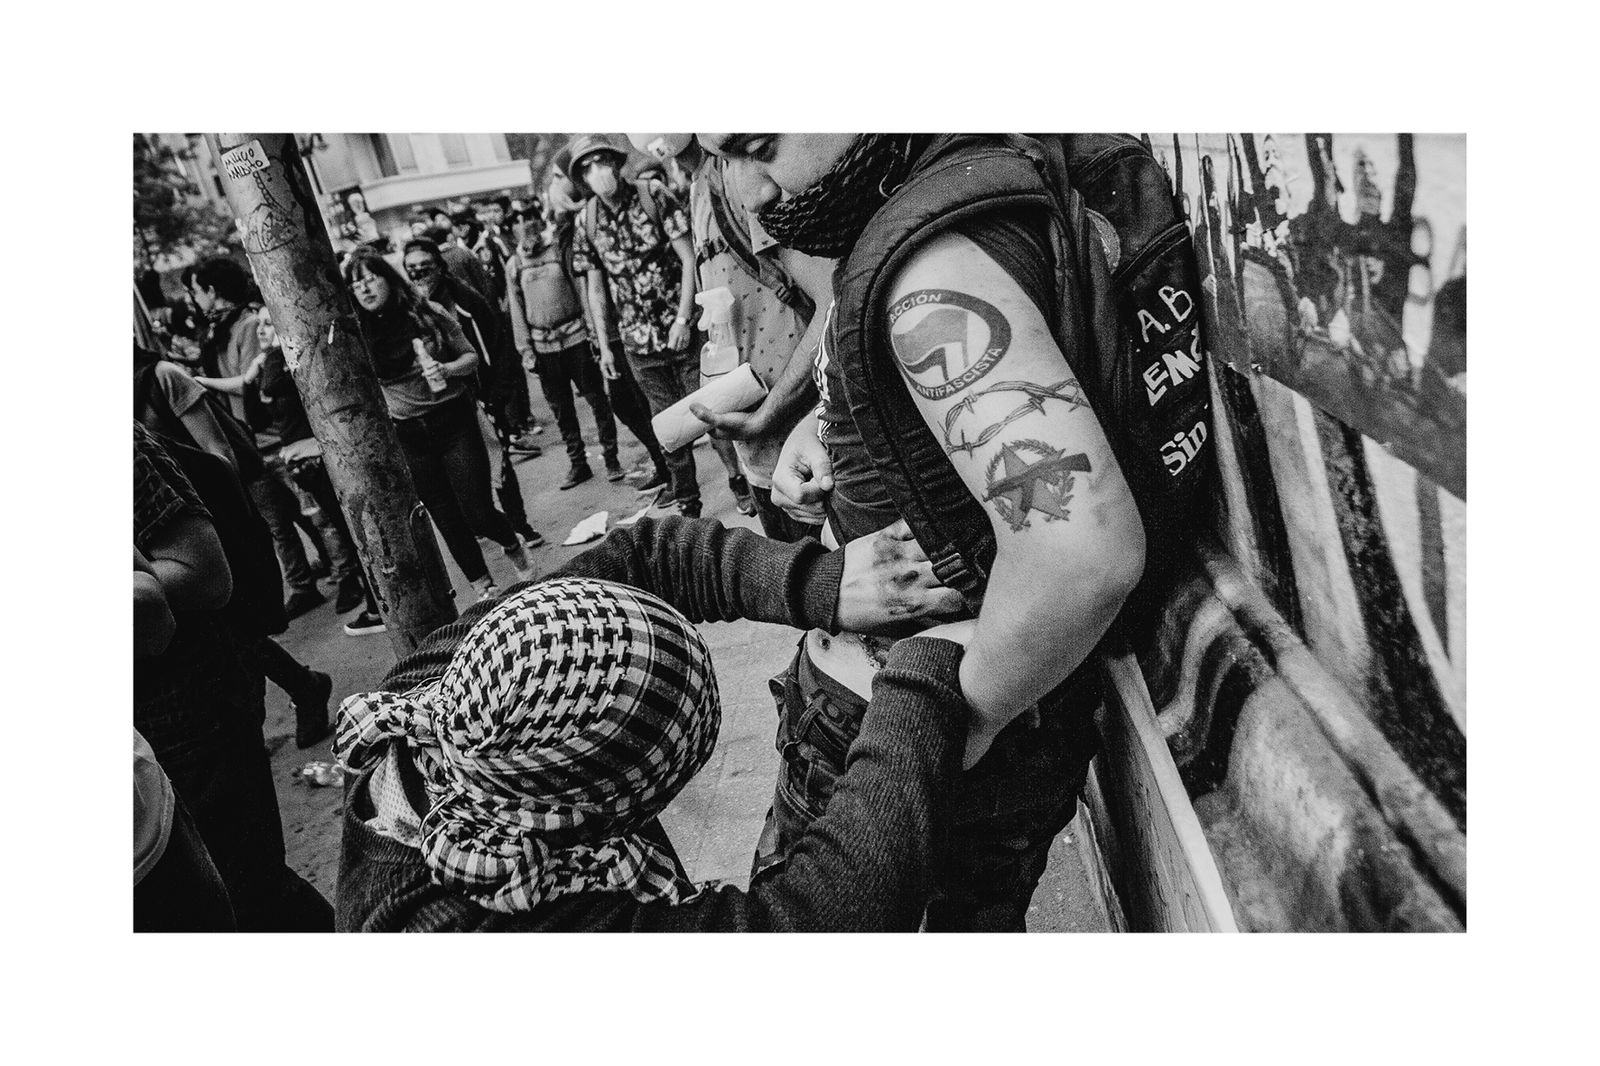 © Matias Cortez - Demonstrator looking for a rubber bullet in one leg